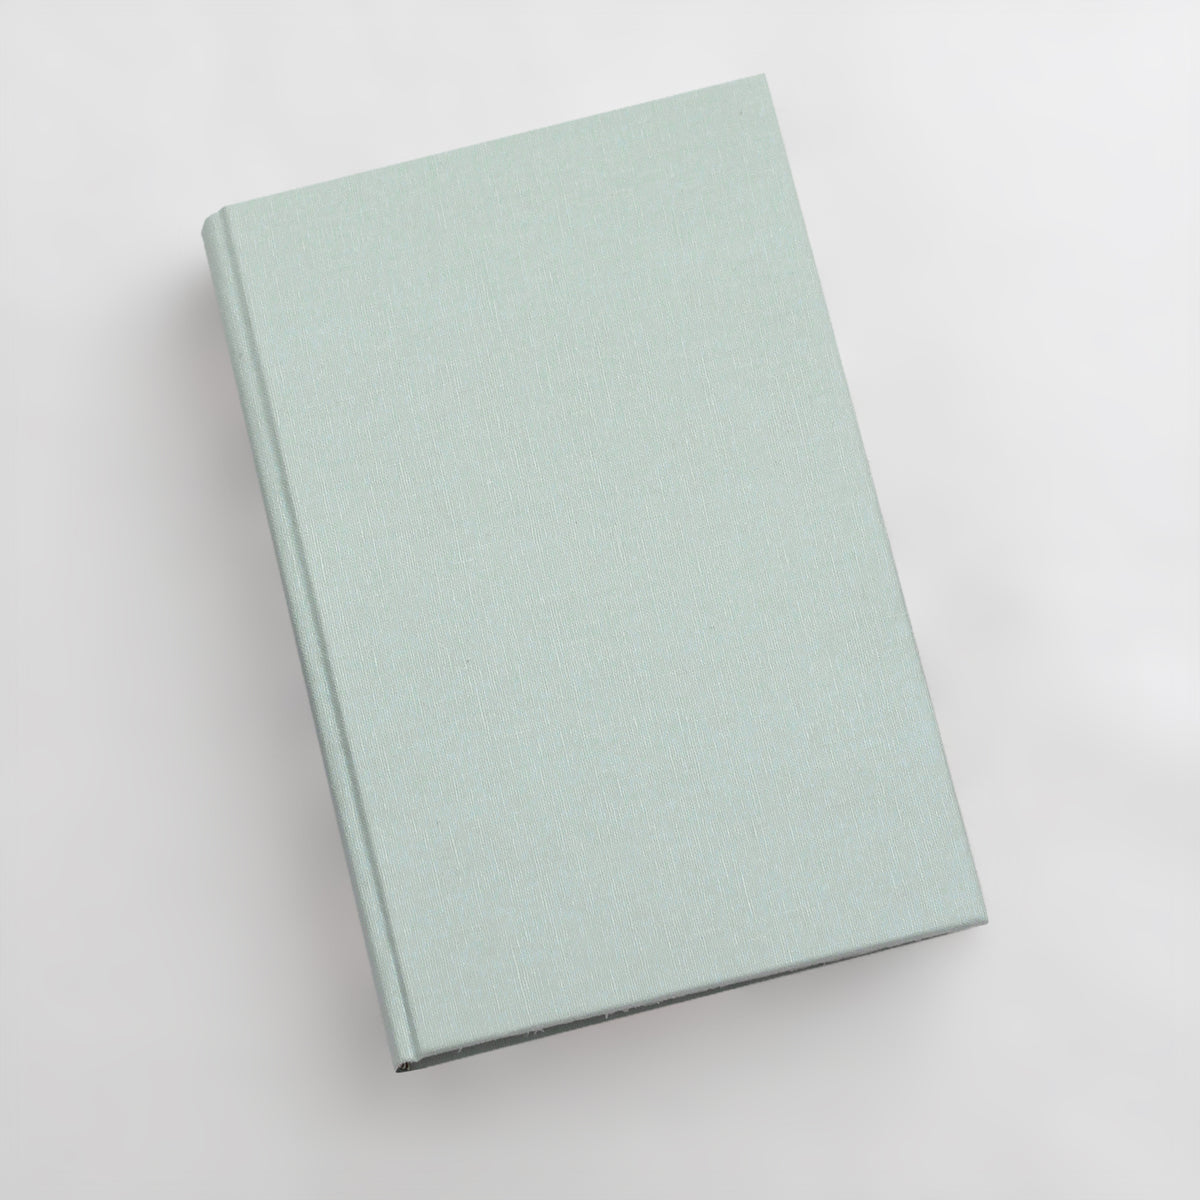 Medium 5.5x8.5 Blank Page Journal | Cover: Pastel Blue Cotton | Available Personalized